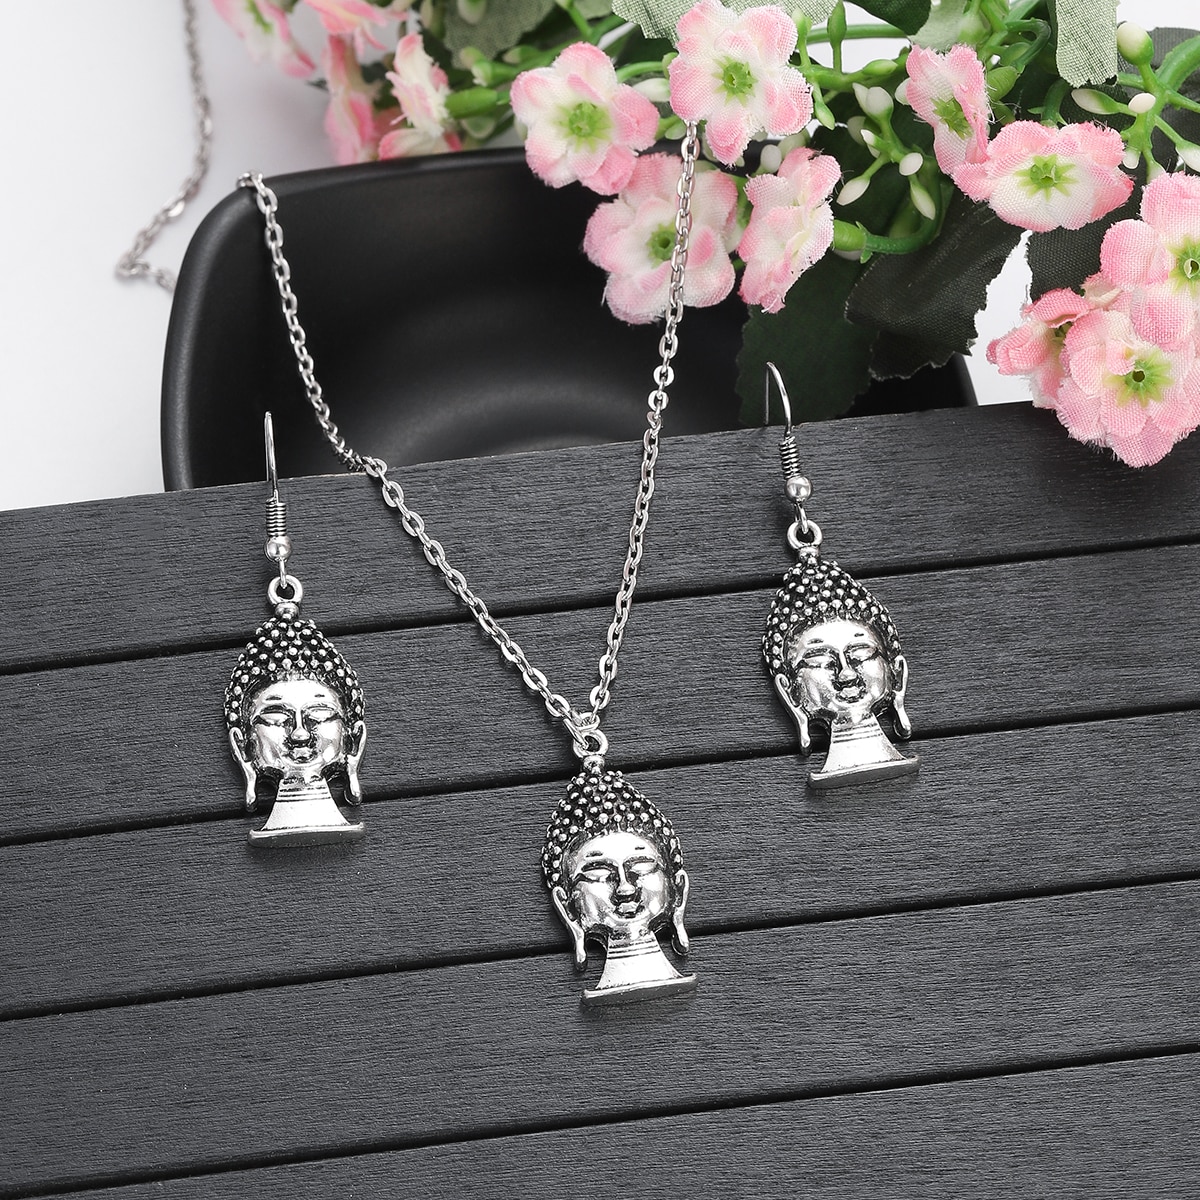 Vintage-Ethnic-Silver-Color-Buddha-Necklace-Set-Women-Alloy-Carved-Buddha-Lucky-Amulet-Jewelry-Sets--1005004970504388-6